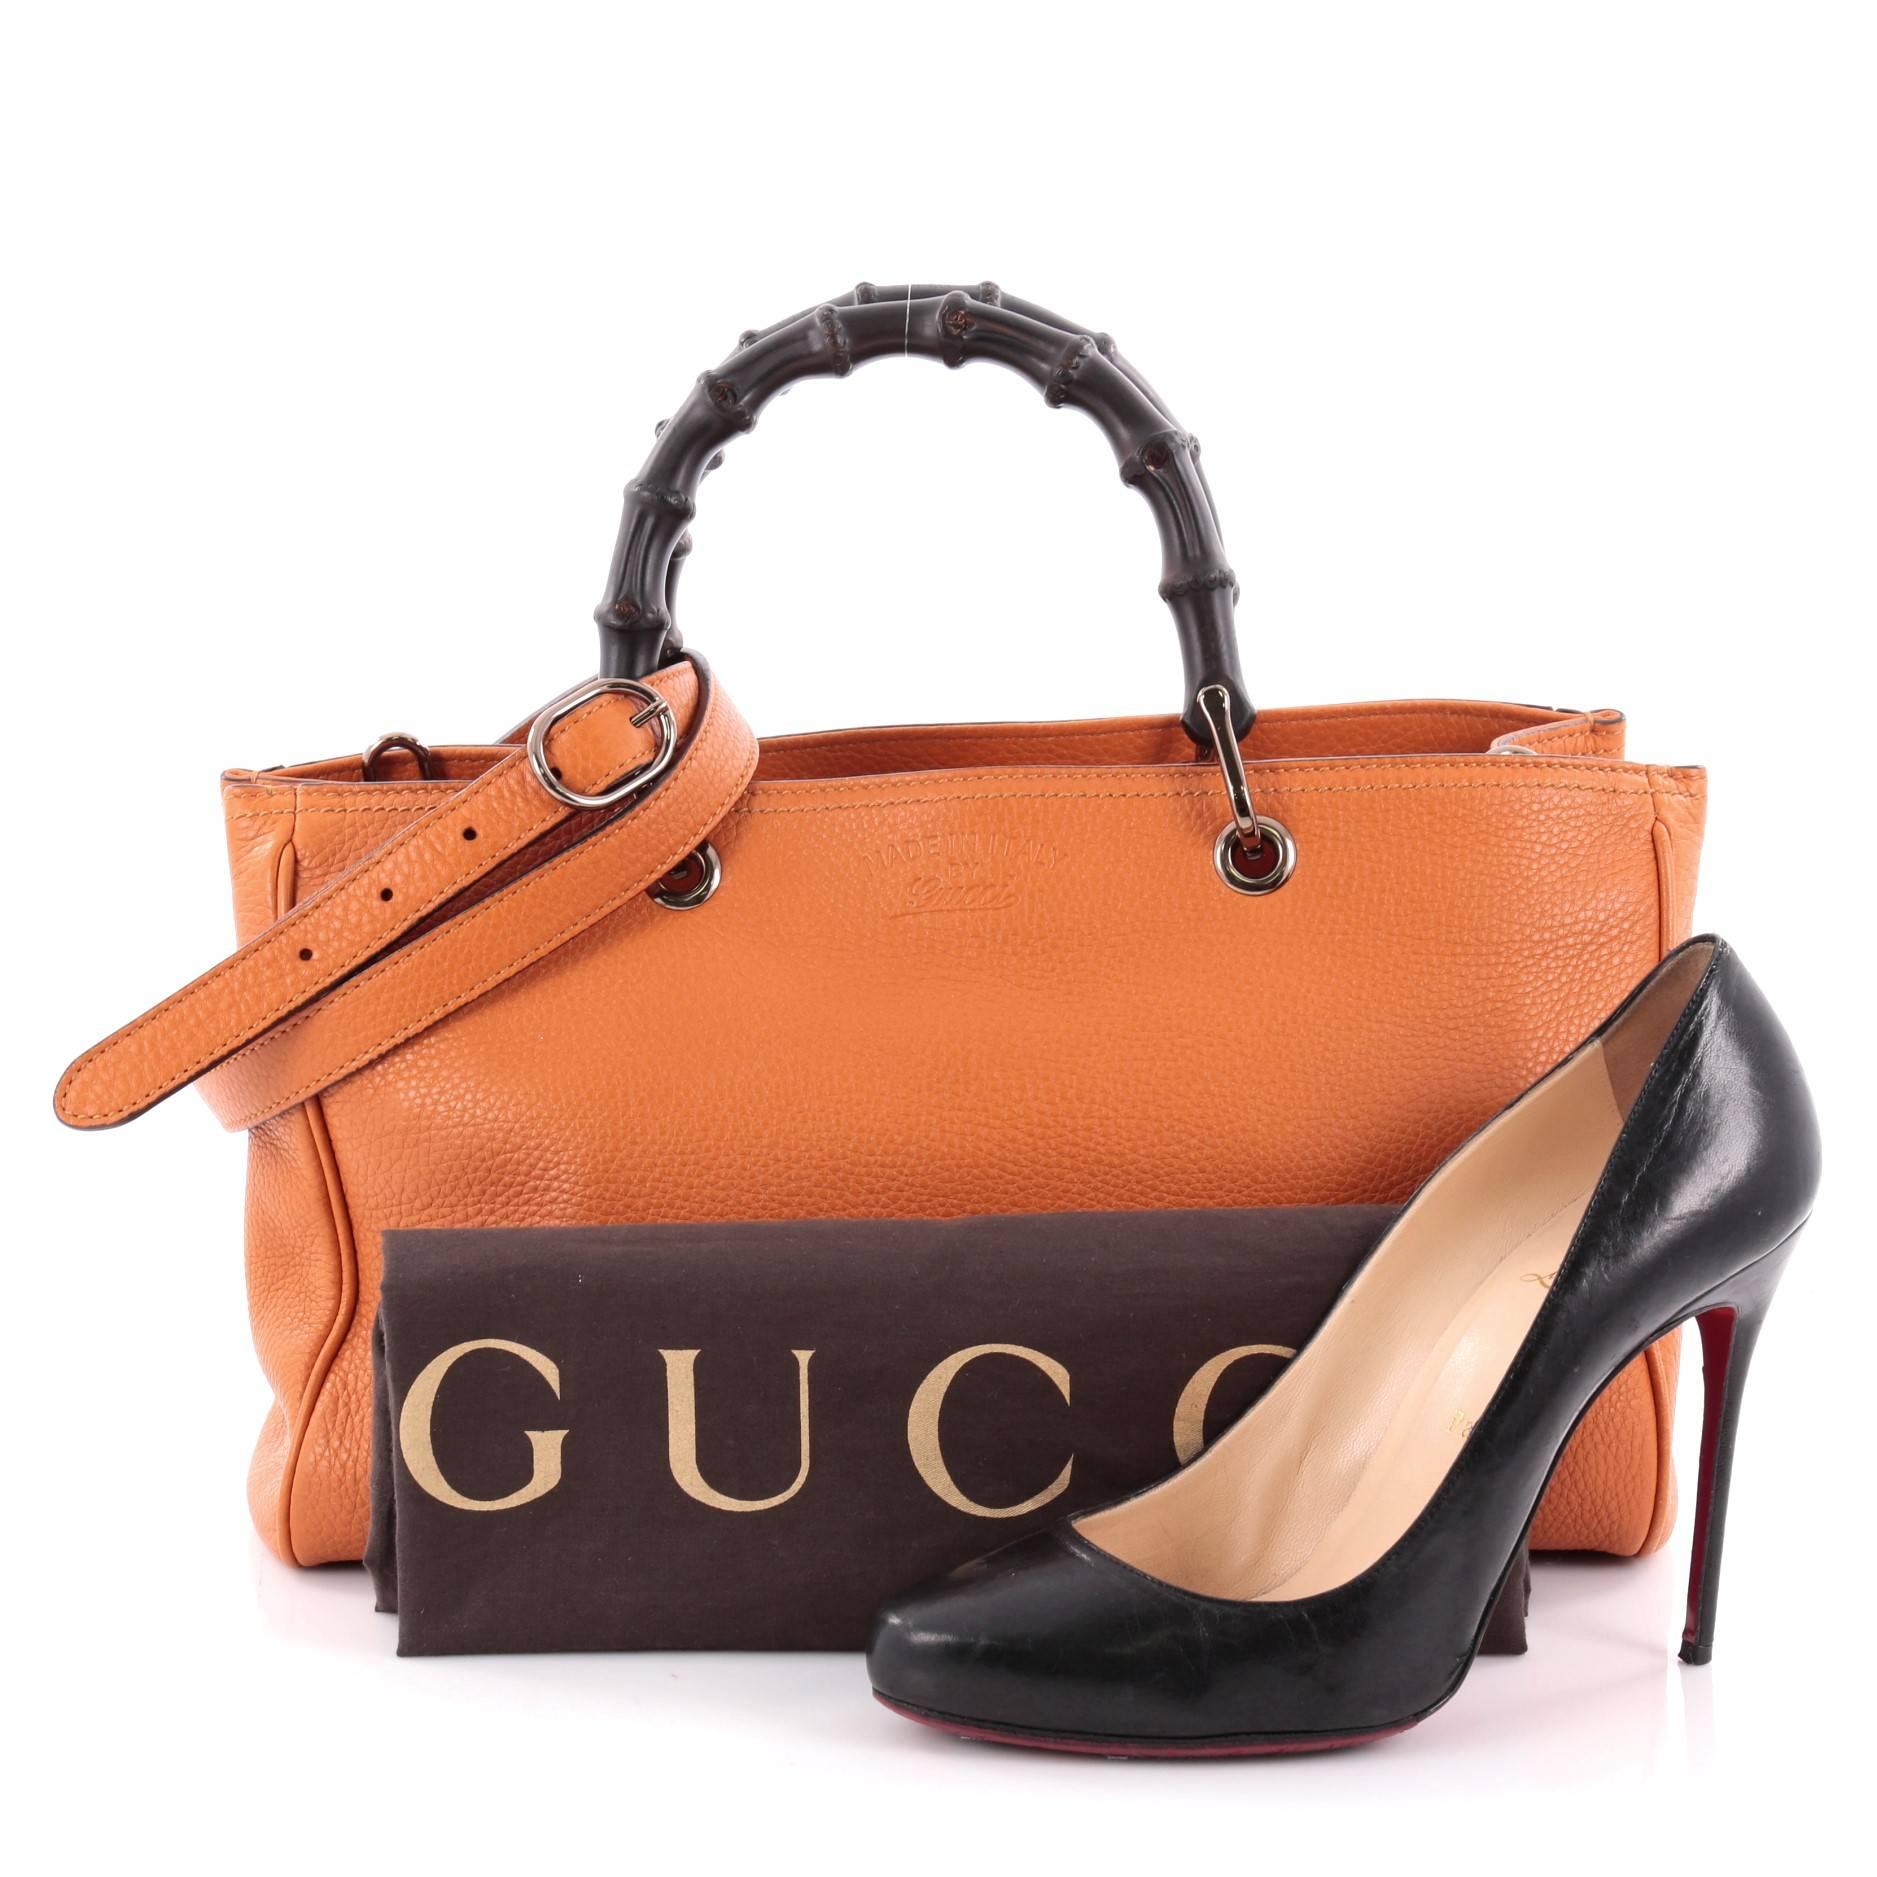 This authentic Gucci Bamboo Shopper Tote Leather Medium is a classic must-have. Crafted from orange leather, this simple yet stylish tote features Gucci's signature sturdy bamboo handles, protective base studs, stamped logo at the front, and rose